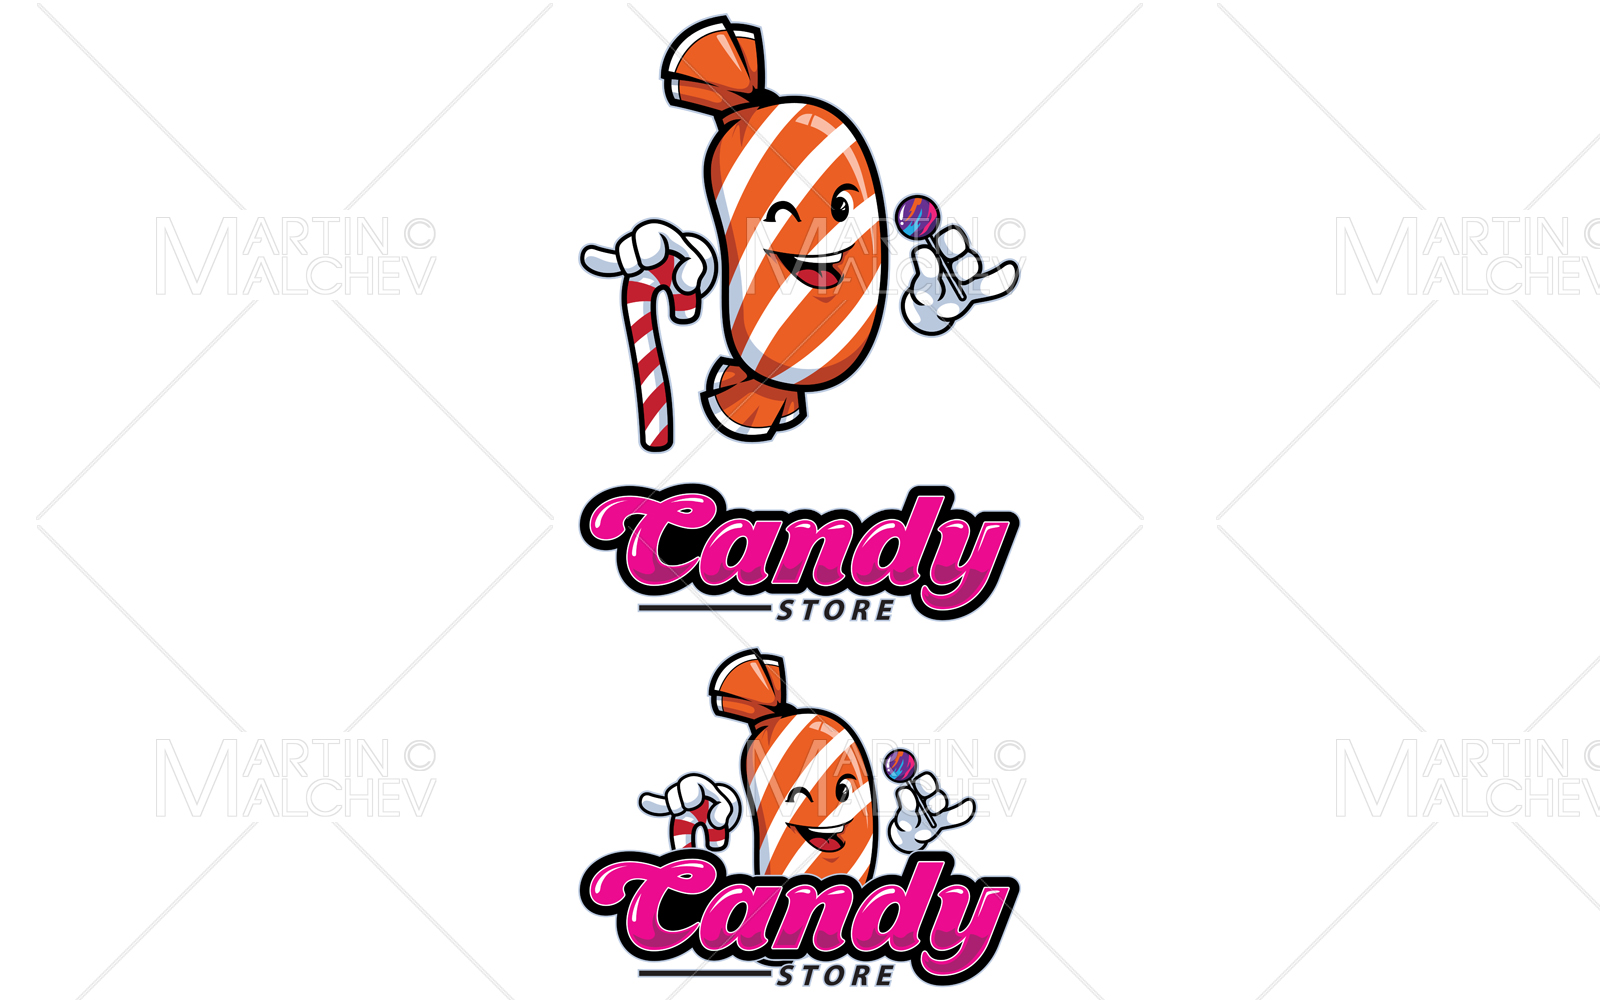 Candy Store Mascot Vector Illustration